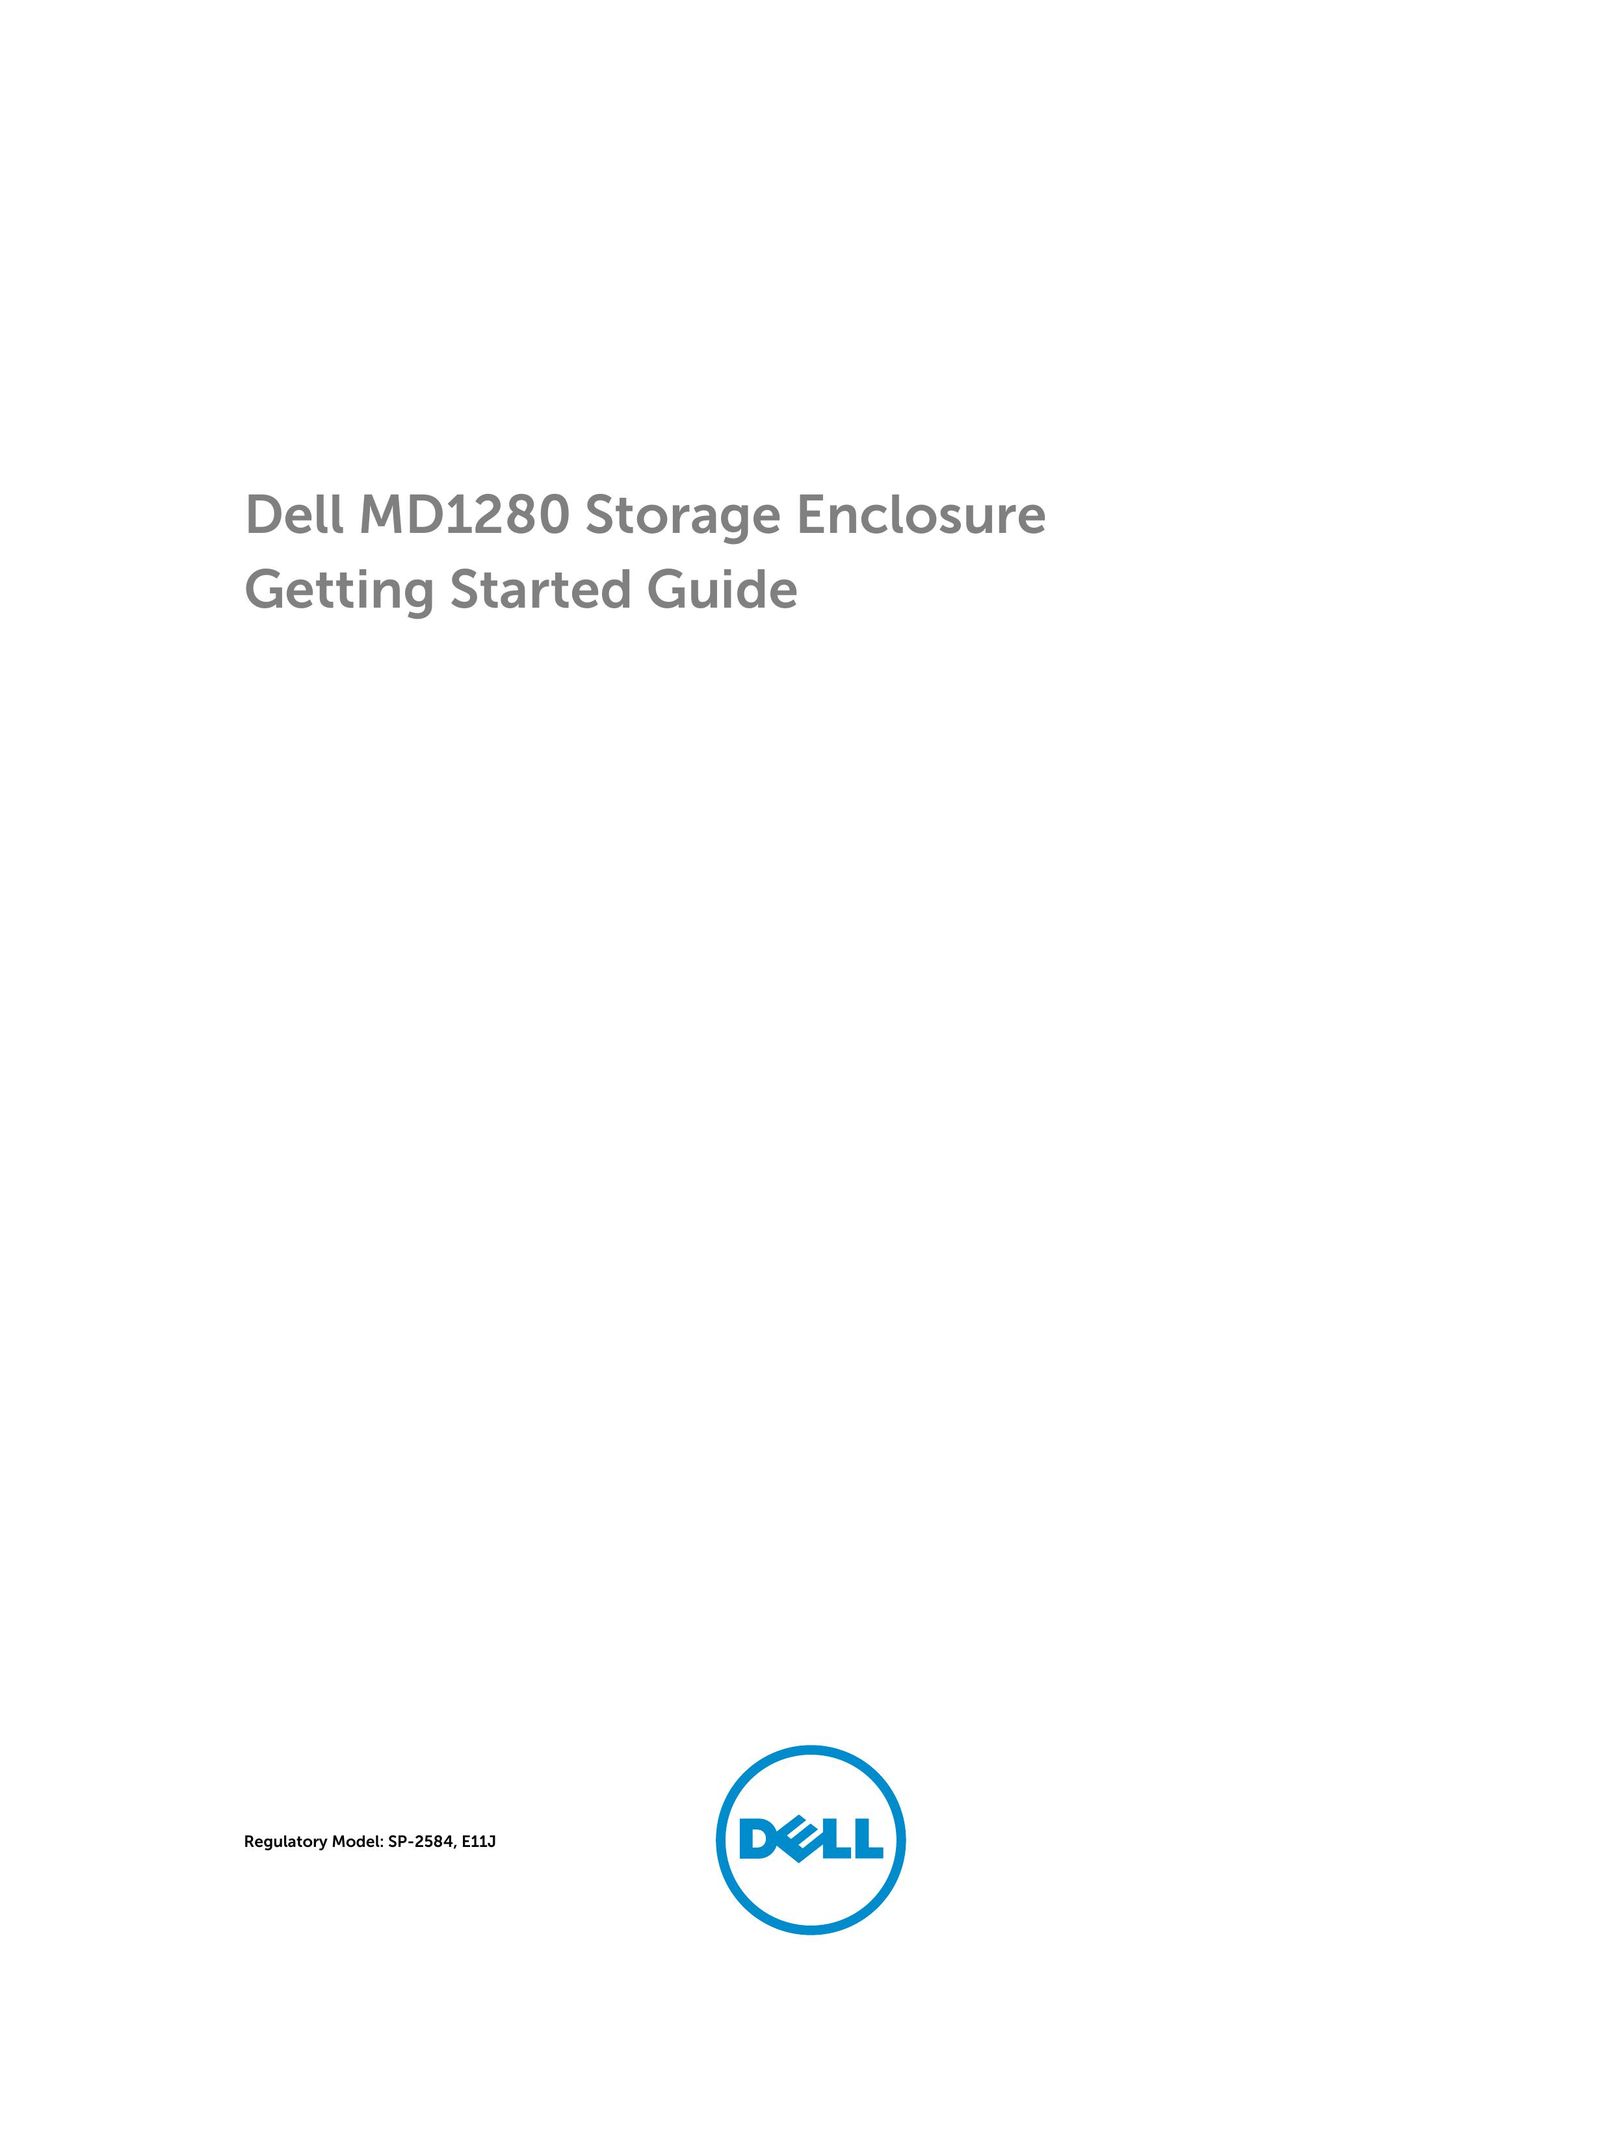 Dell SP-2584 Tool Storage User Manual